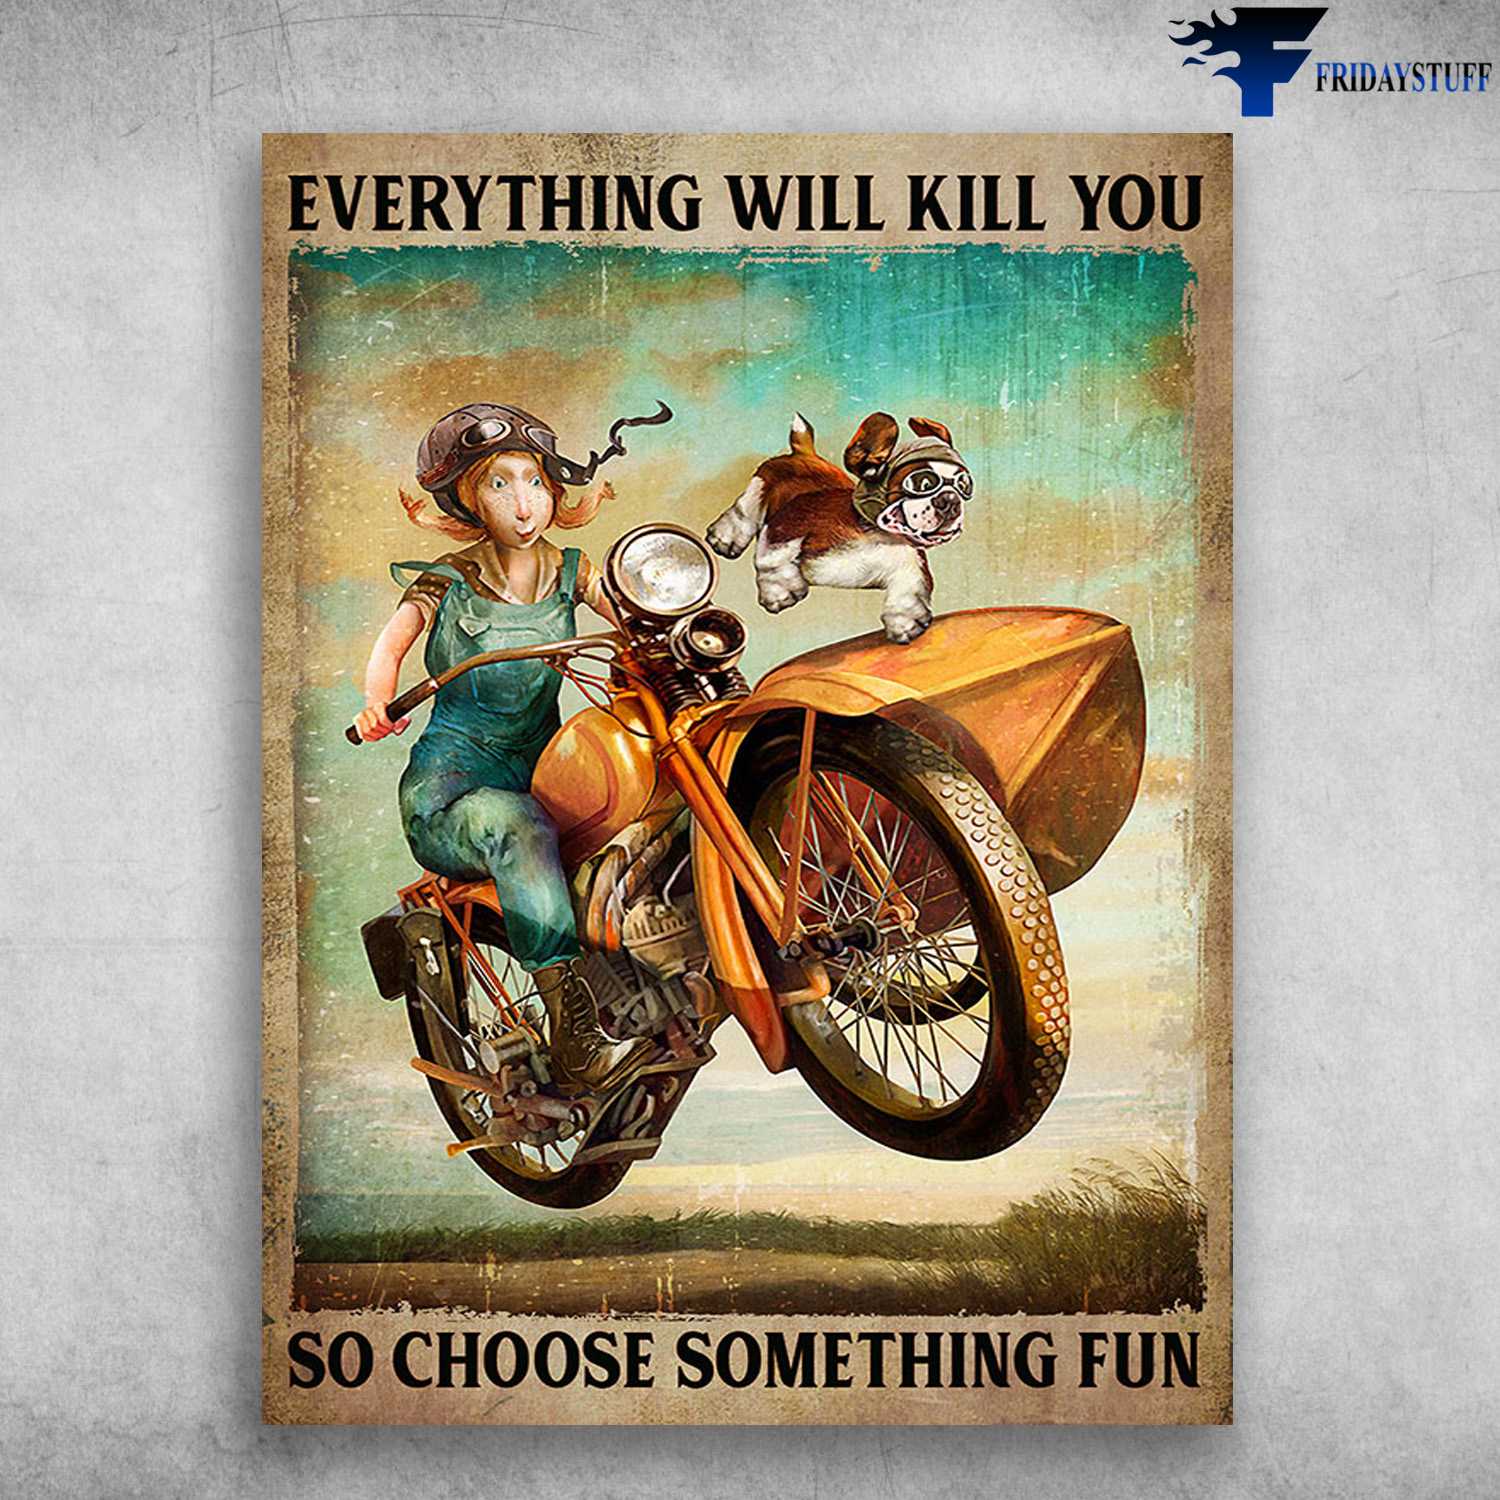 Sidecar Driving, Hang Out With Dog - Everthing Will Kill You, So Choose Something Fun